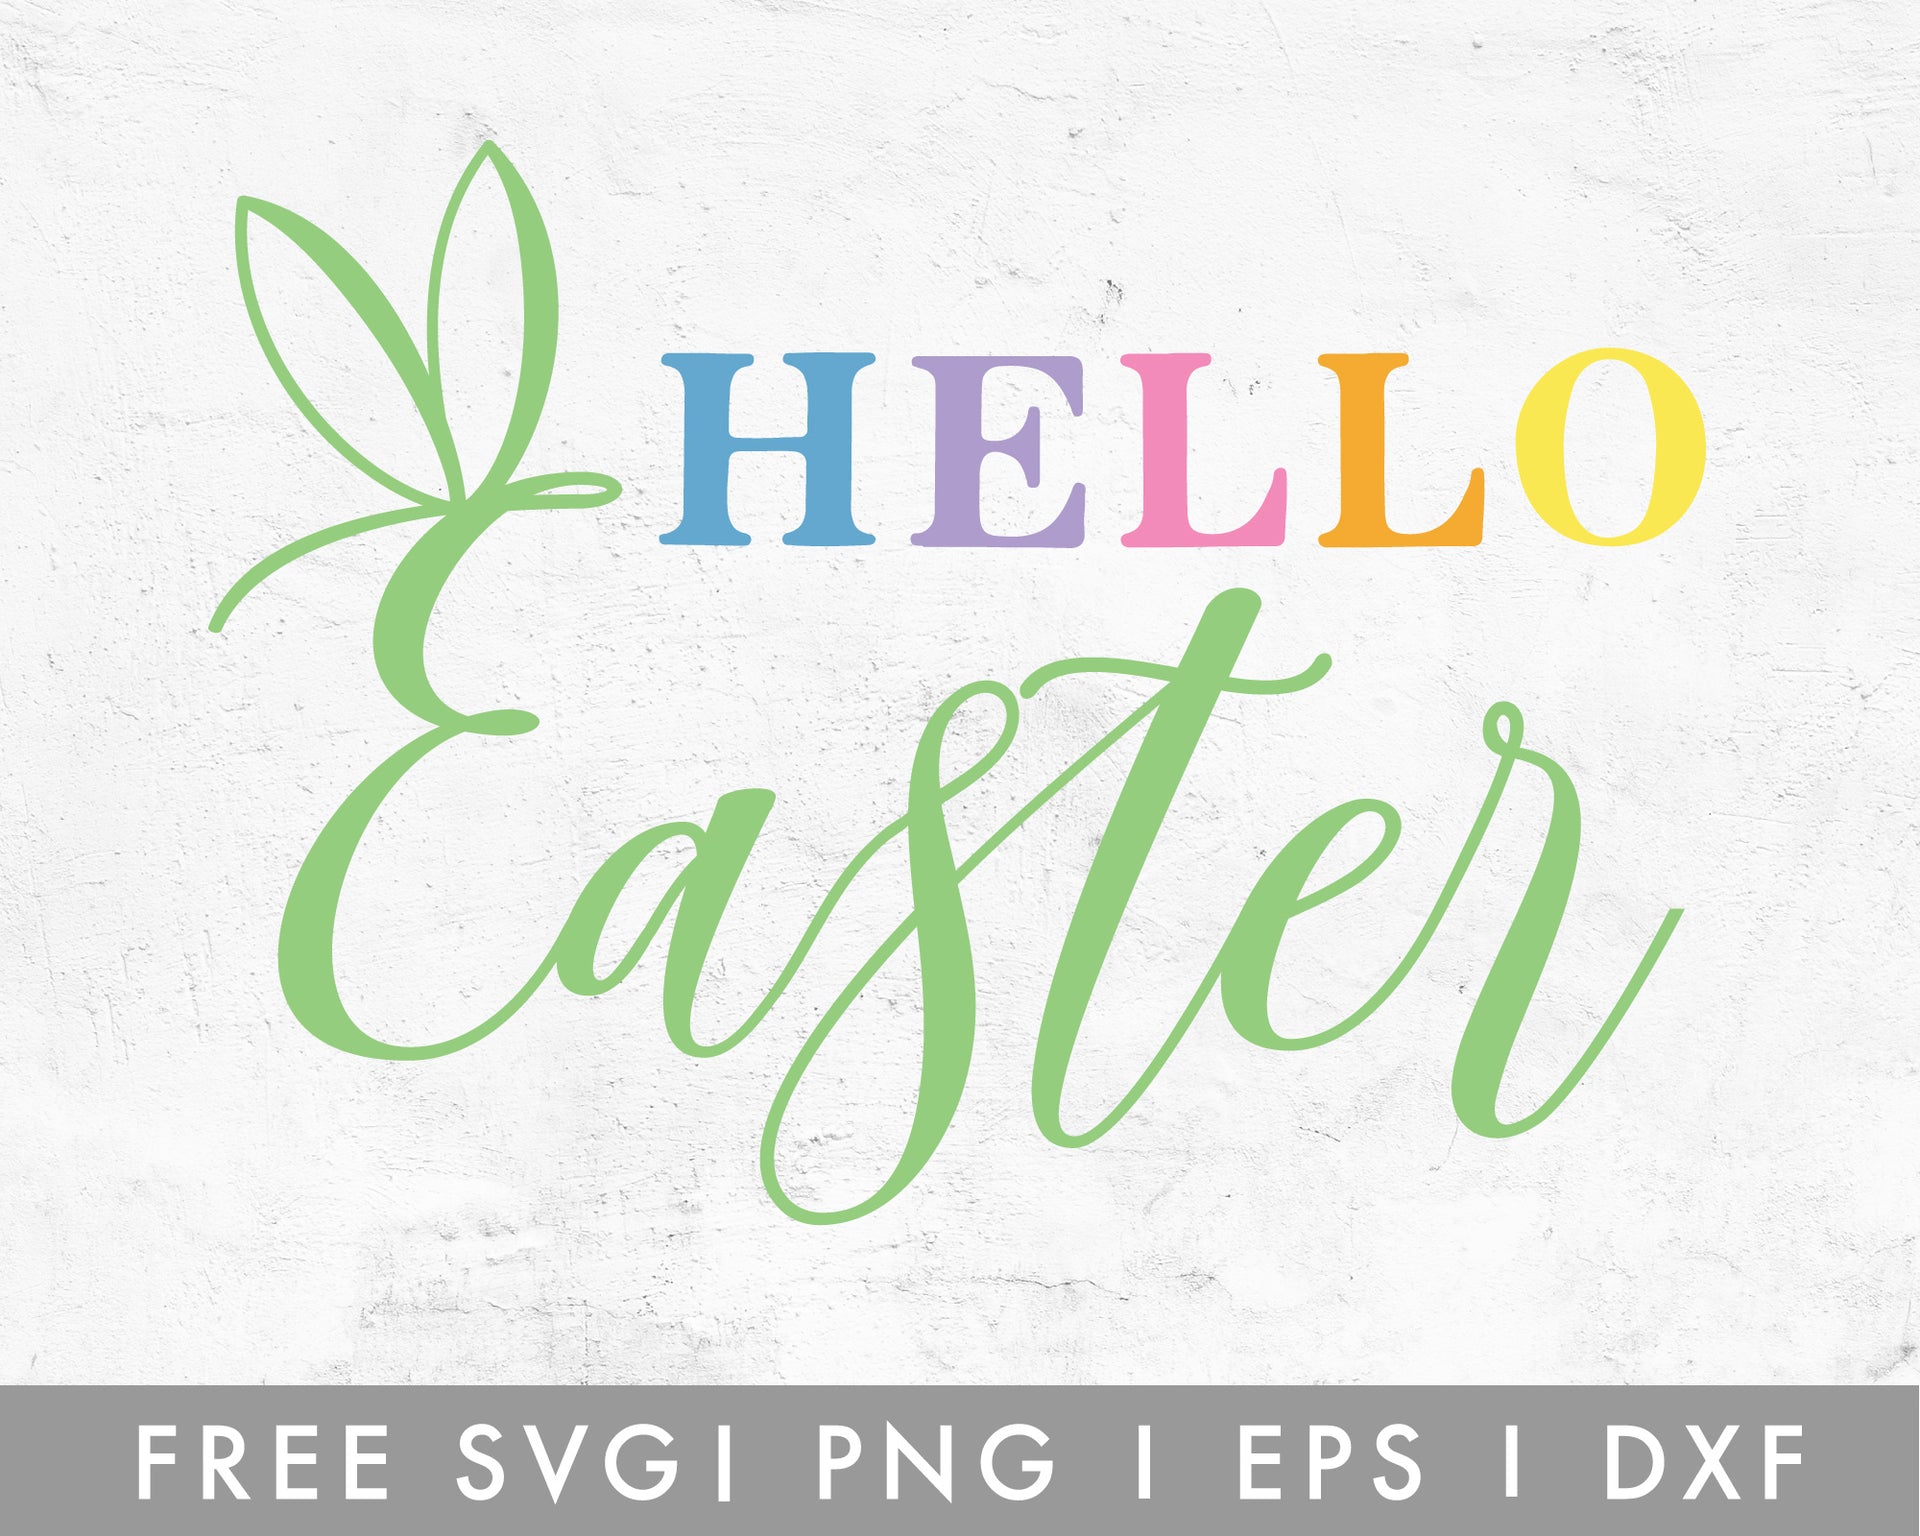 Welcome Back Svg, Welcome Back Prints Clipart Decal, Welcome Back Cricut,  Silhouette Cameo,welcome Back Sticker -  Norway